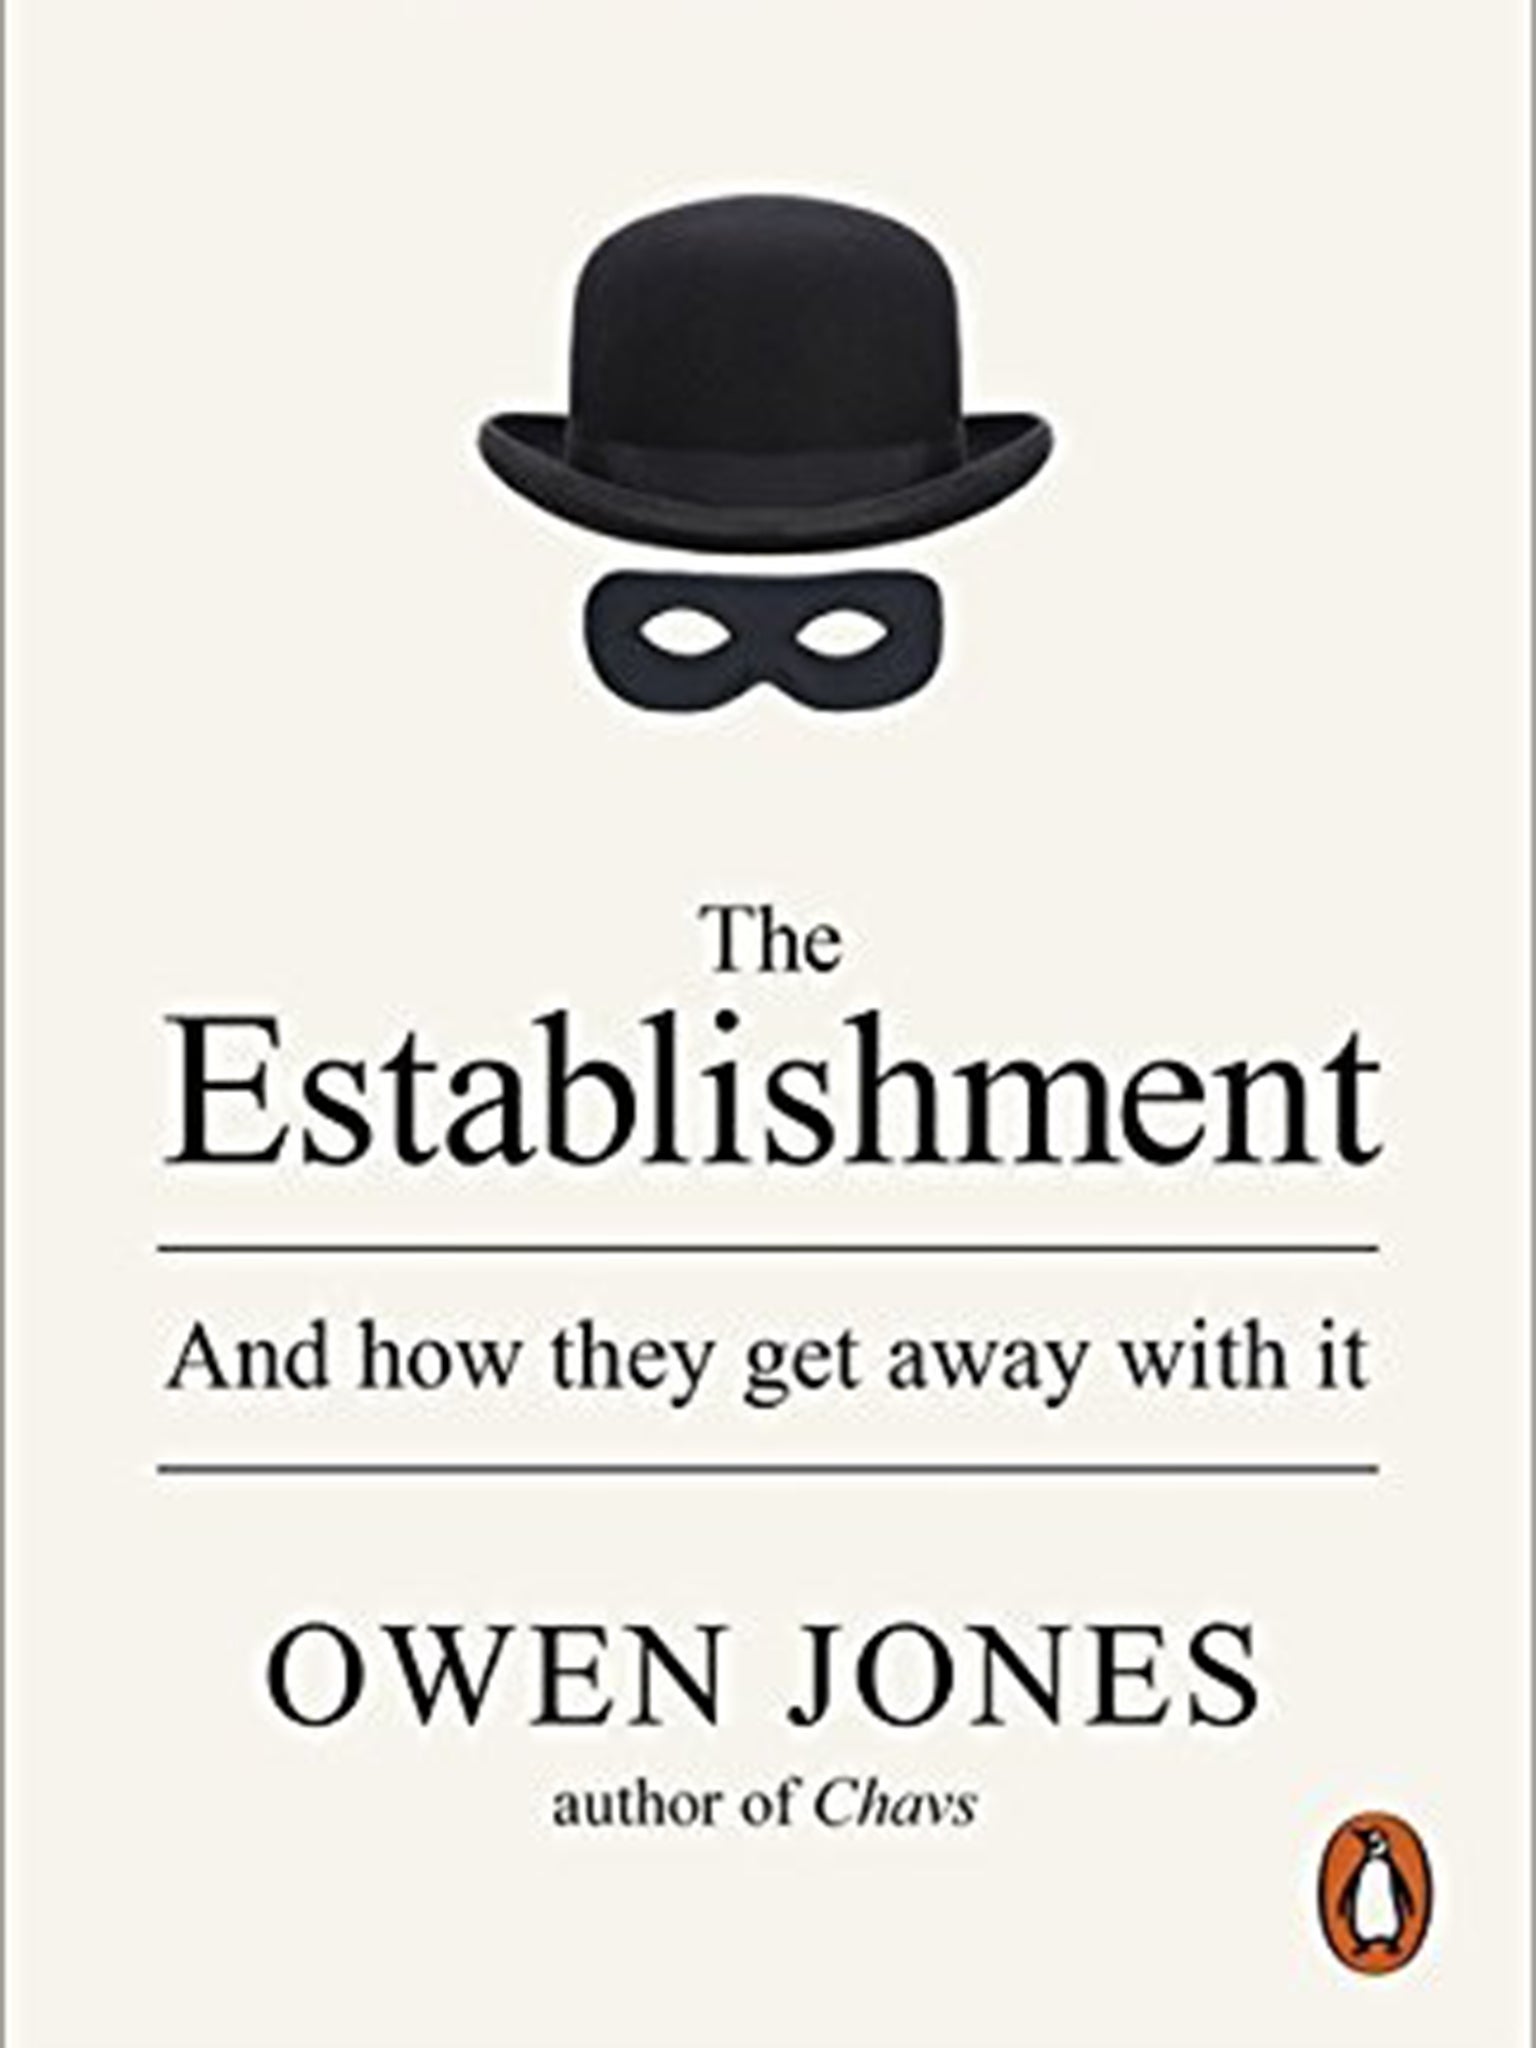 Owen Jones’s The Establishment: And How They Get Away With It